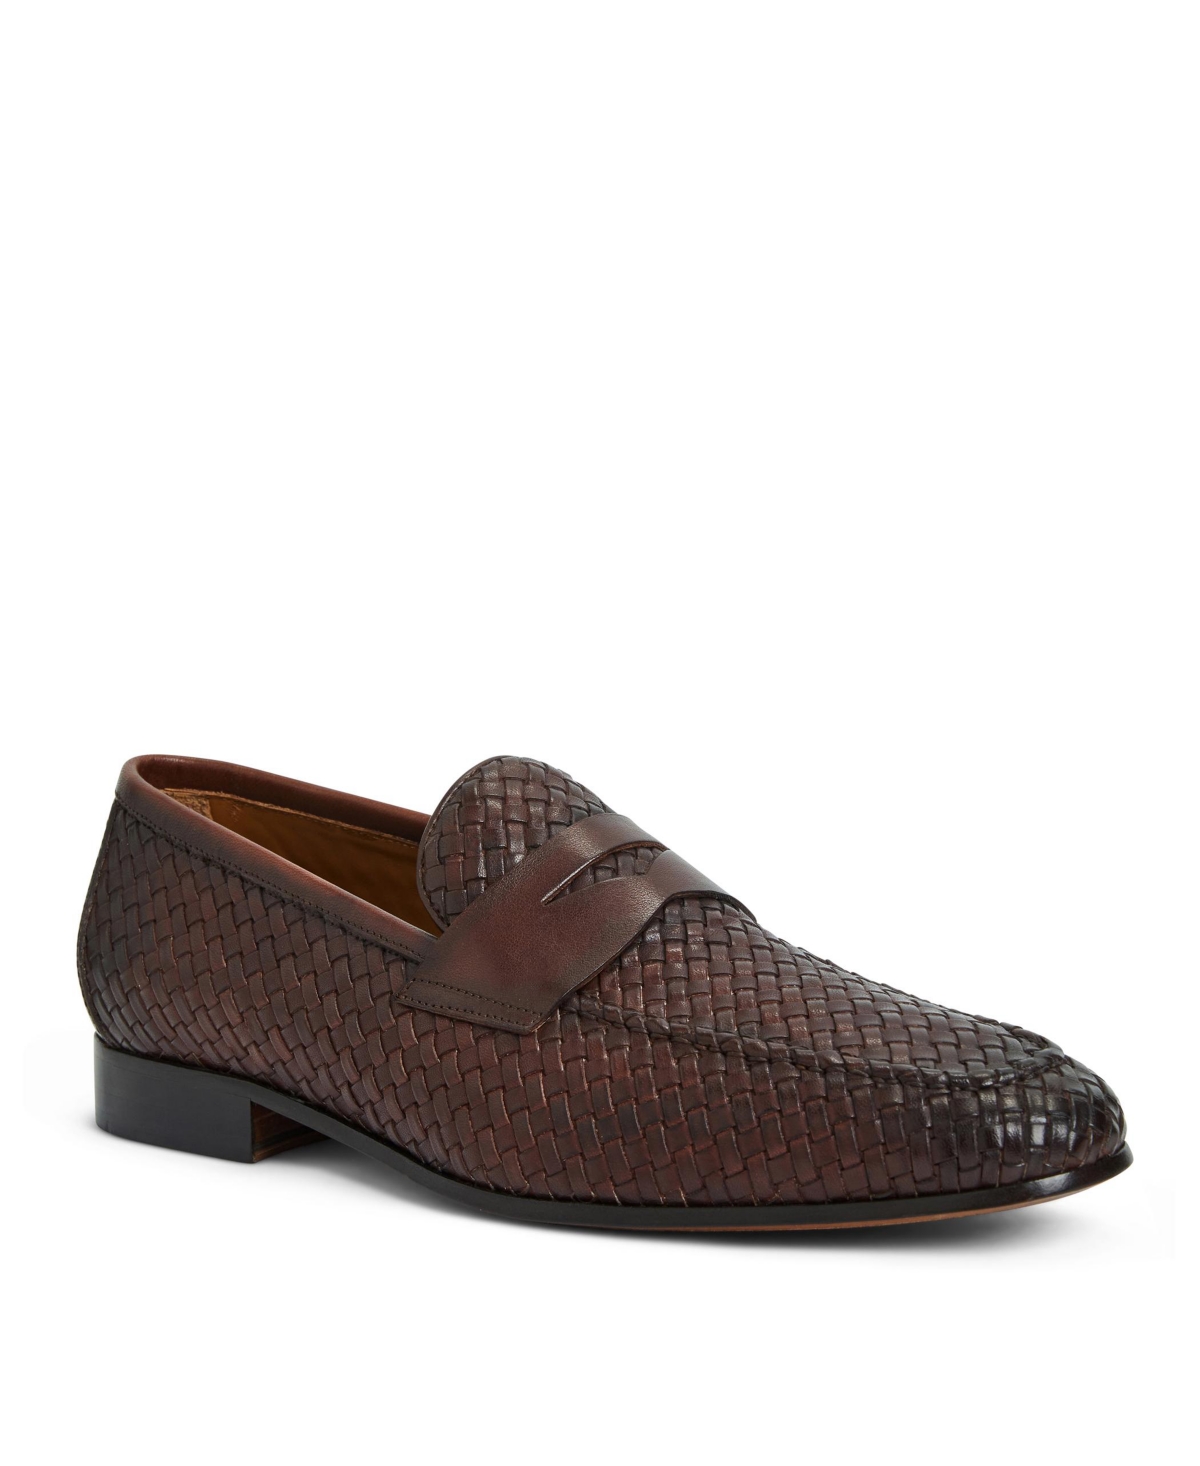 Men's Manfredo Woven Leather Penny Loafers - Brown Woven